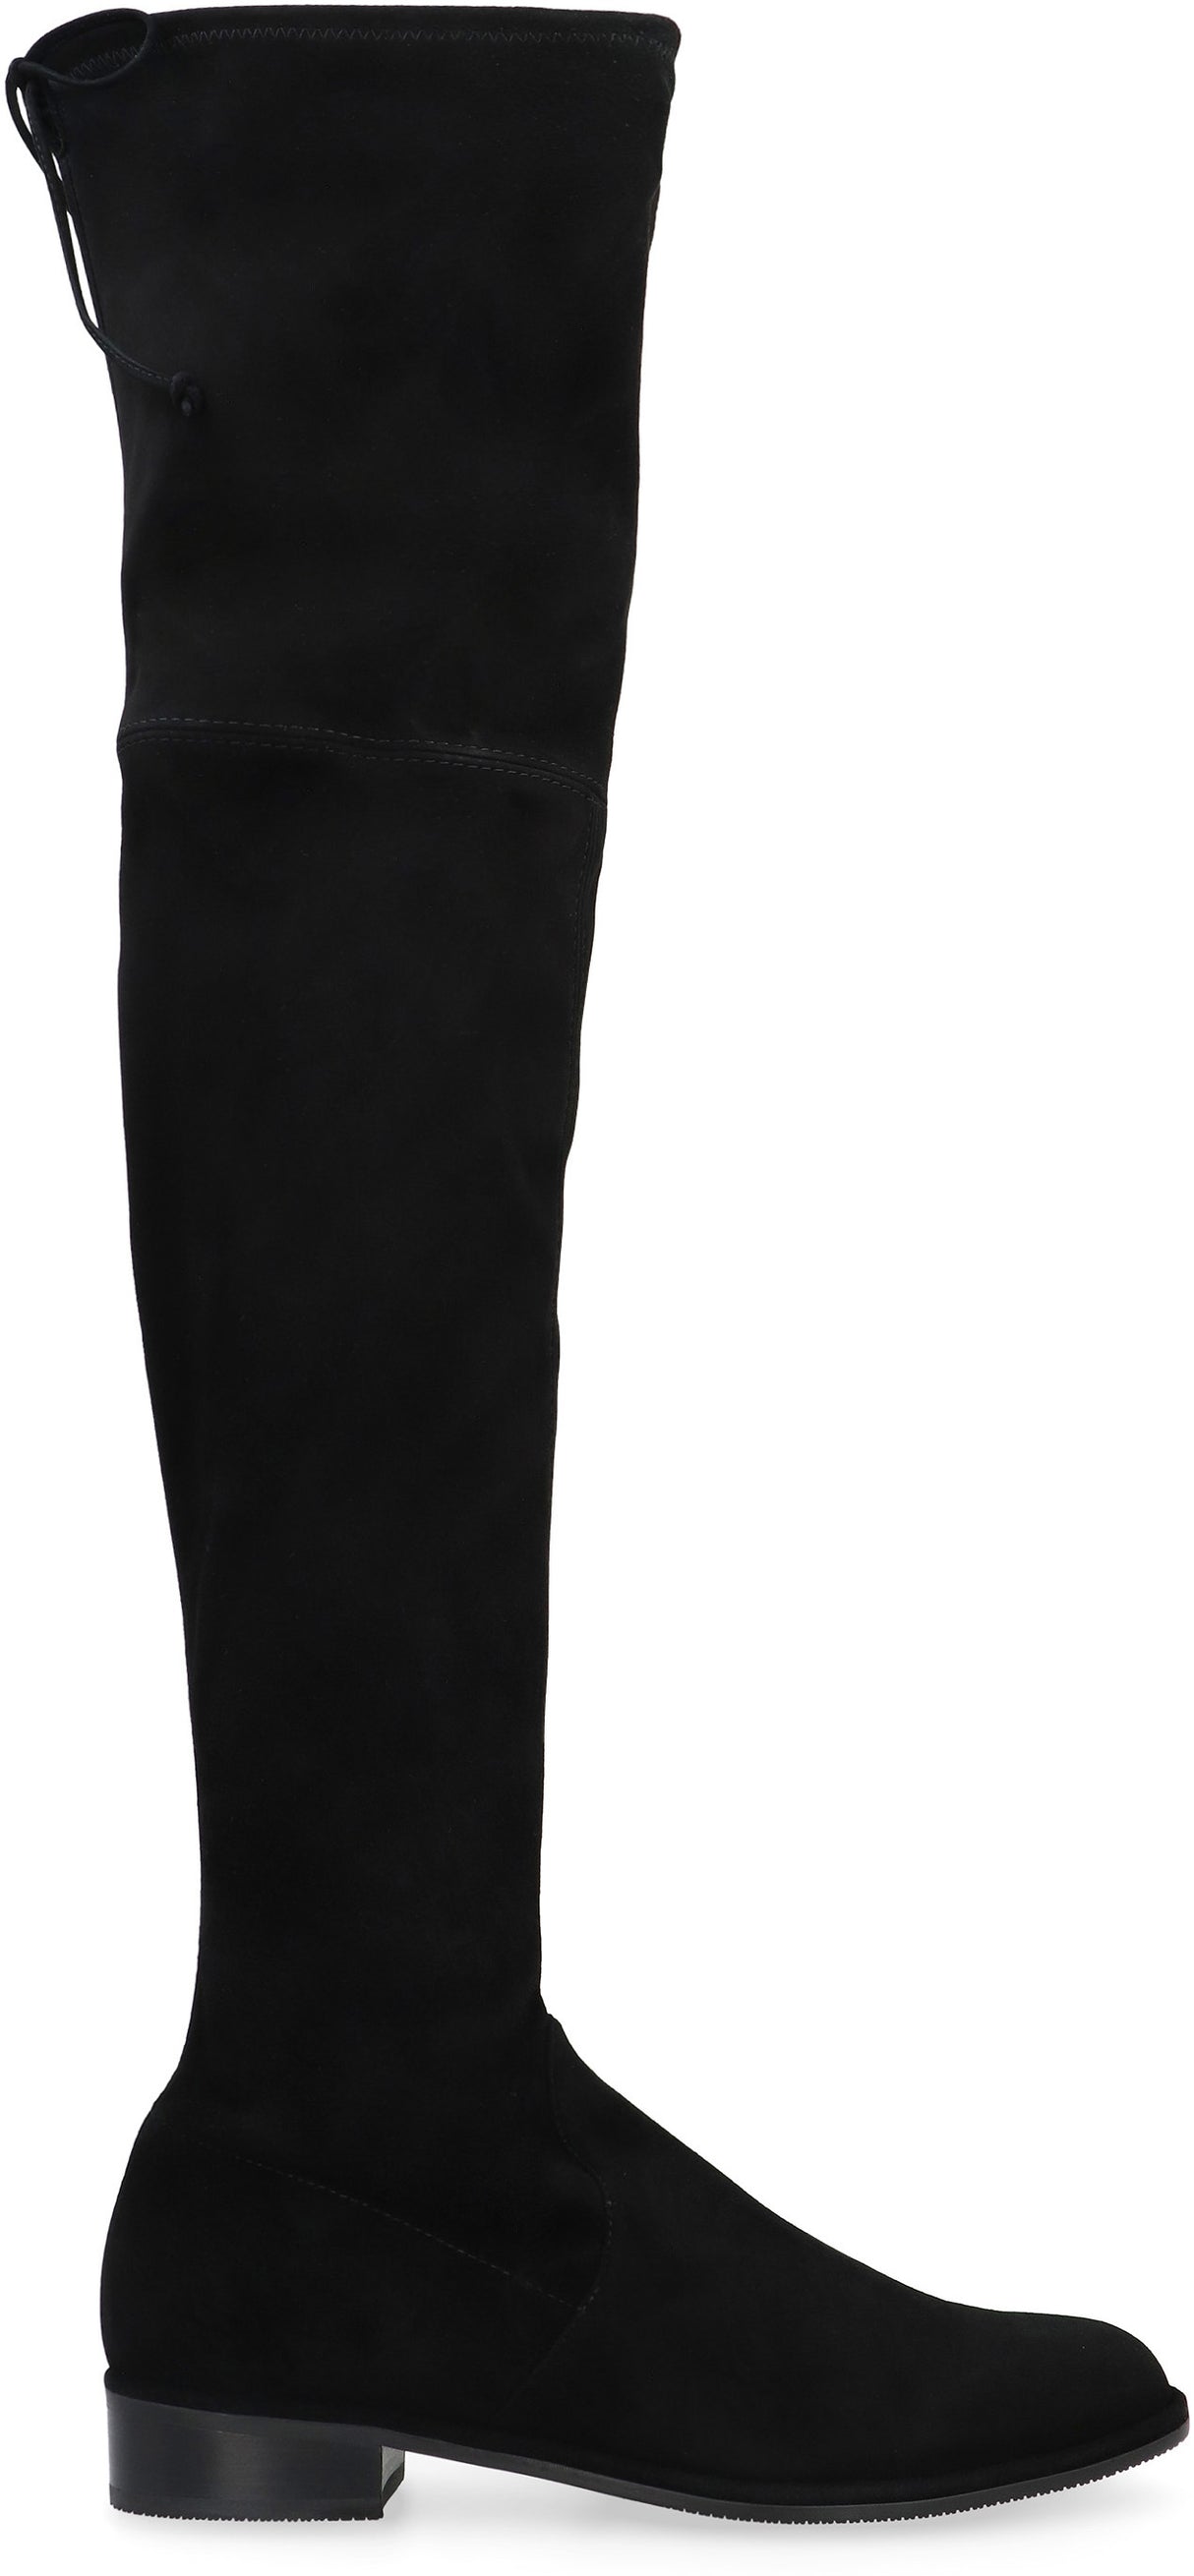 Stylish Black Over-the-Knee Boots for Women